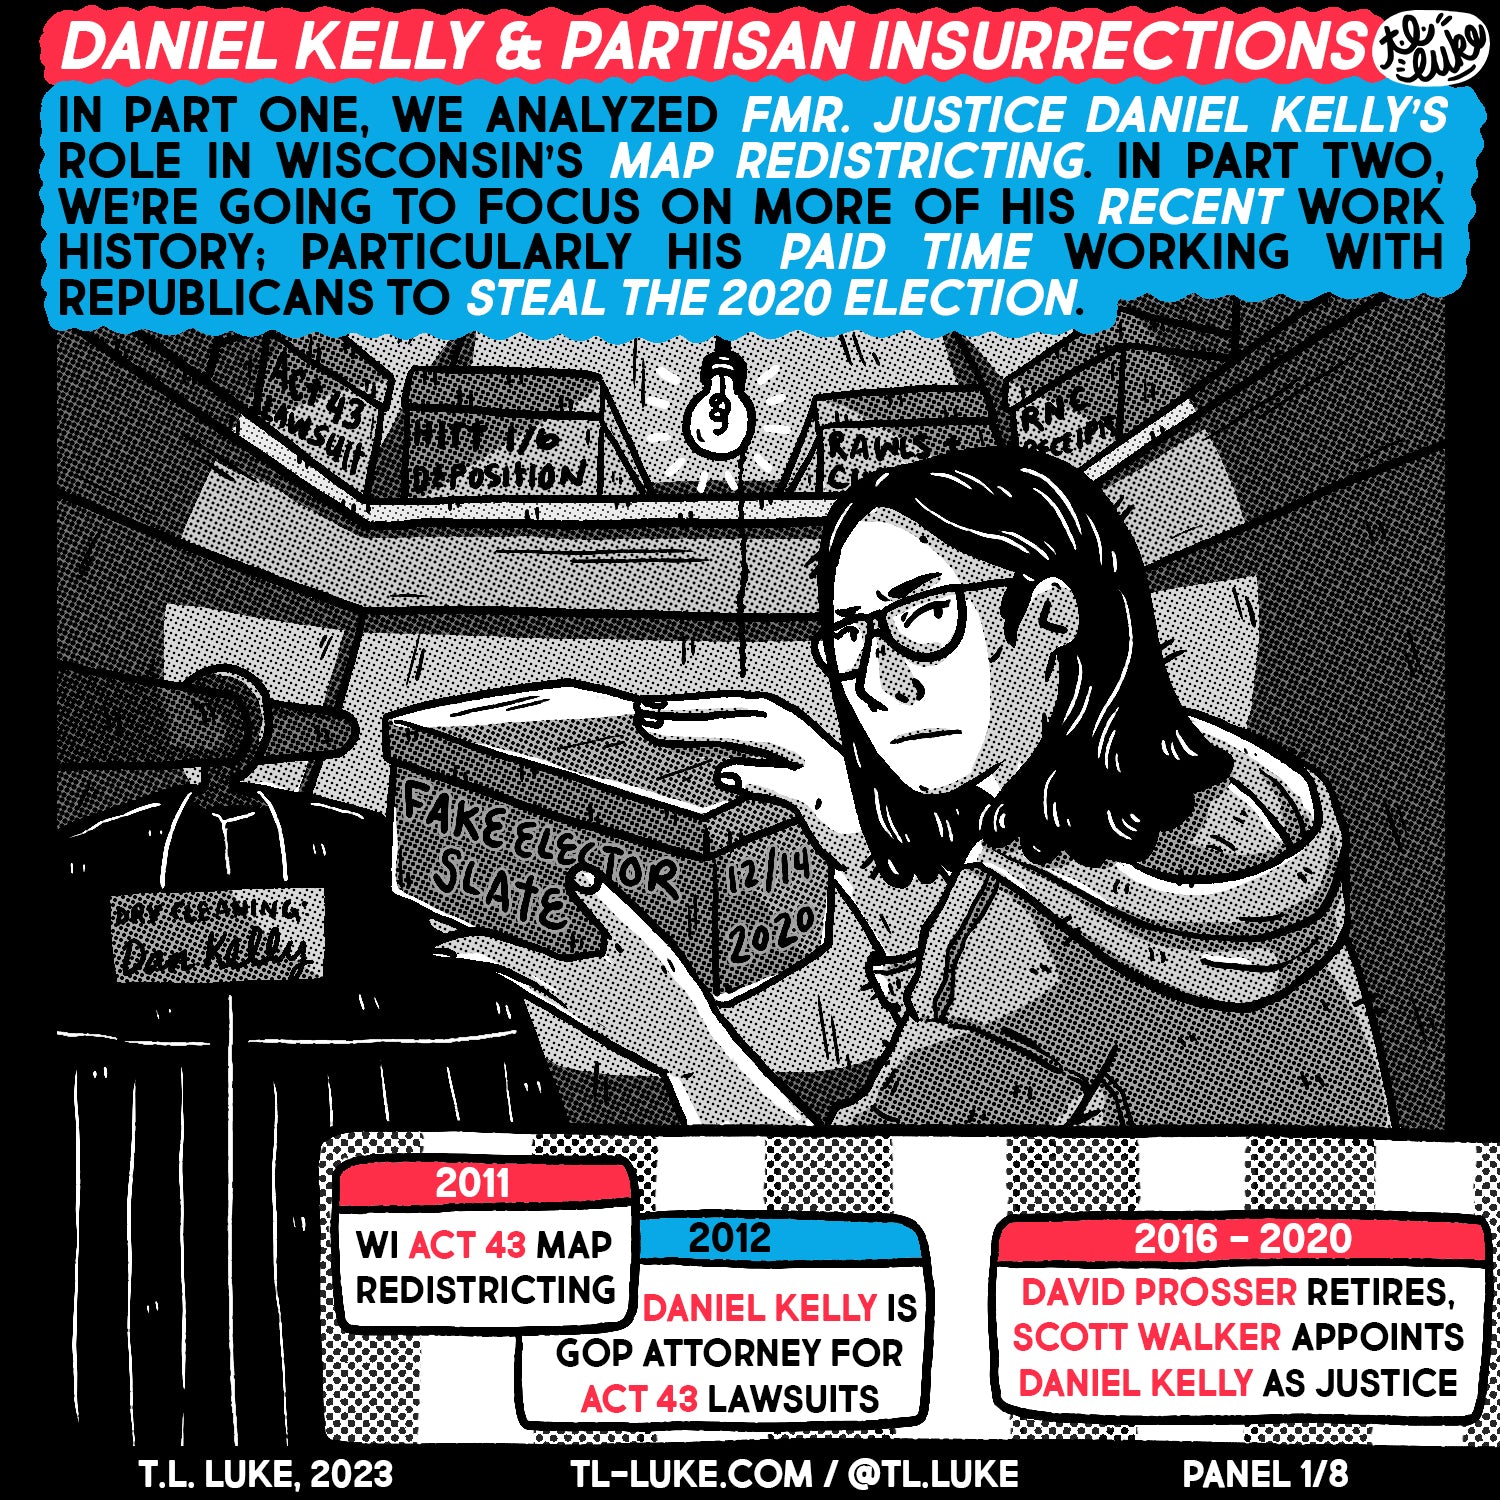 Panel 1 of “Daniel Kelly & Partisan Insurrections” comic by T.L. Luke. This one says it’ll be about election denialism.